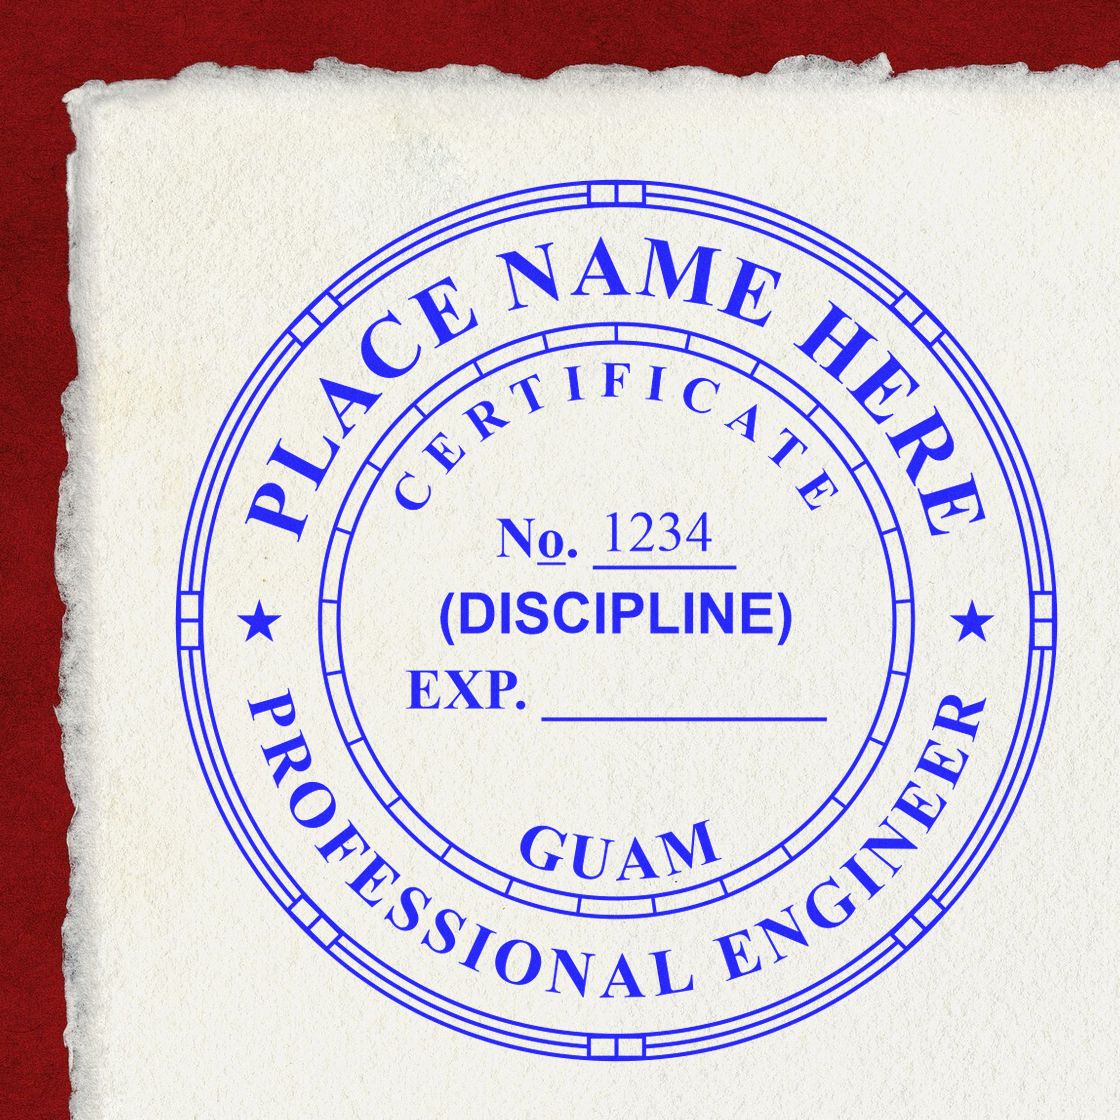 An alternative view of the Guam Professional Engineer Seal Stamp stamped on a sheet of paper showing the image in use